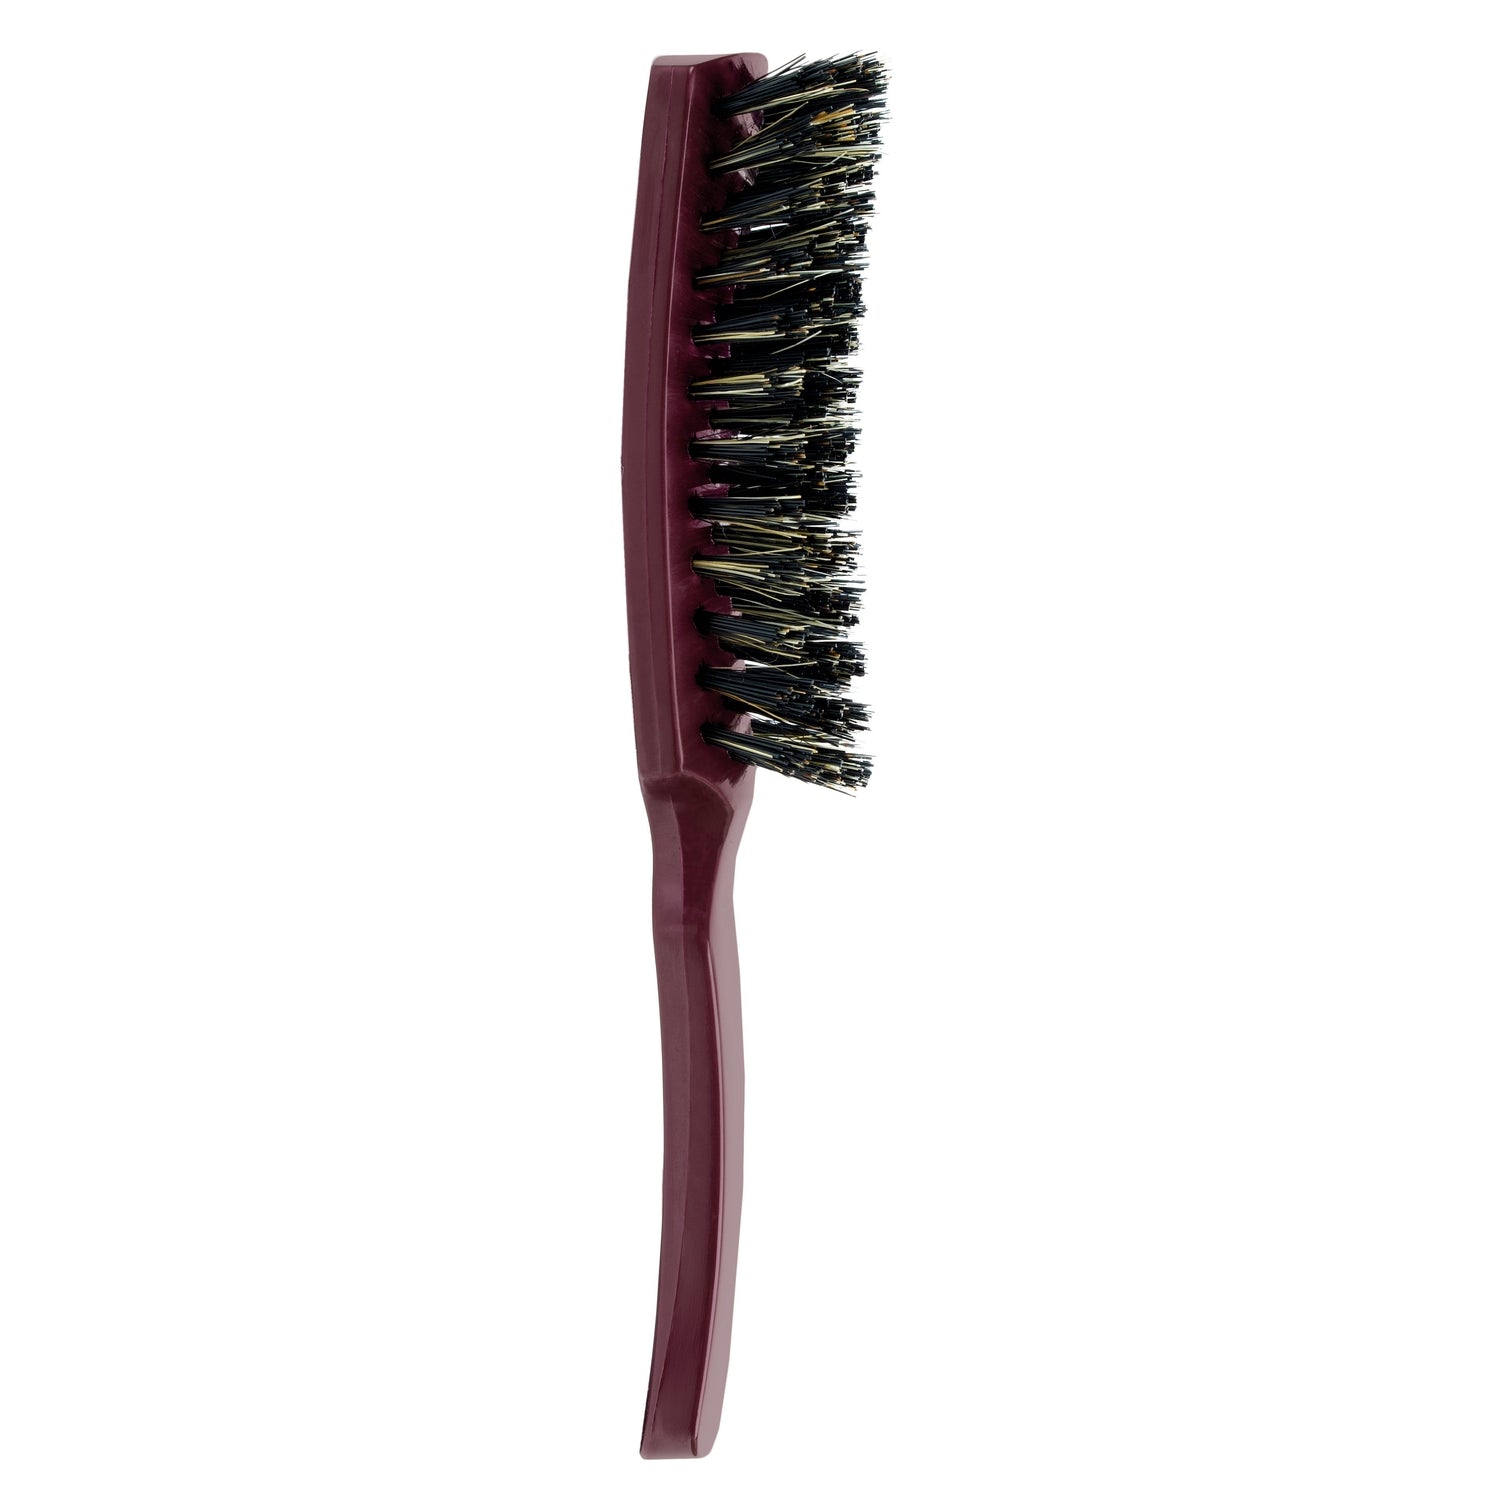 Nylon and Boar Bristle Professional Styling Hairbrush for all hair types - Mulberry Color-Hair Brushes-Fuller Brush Company